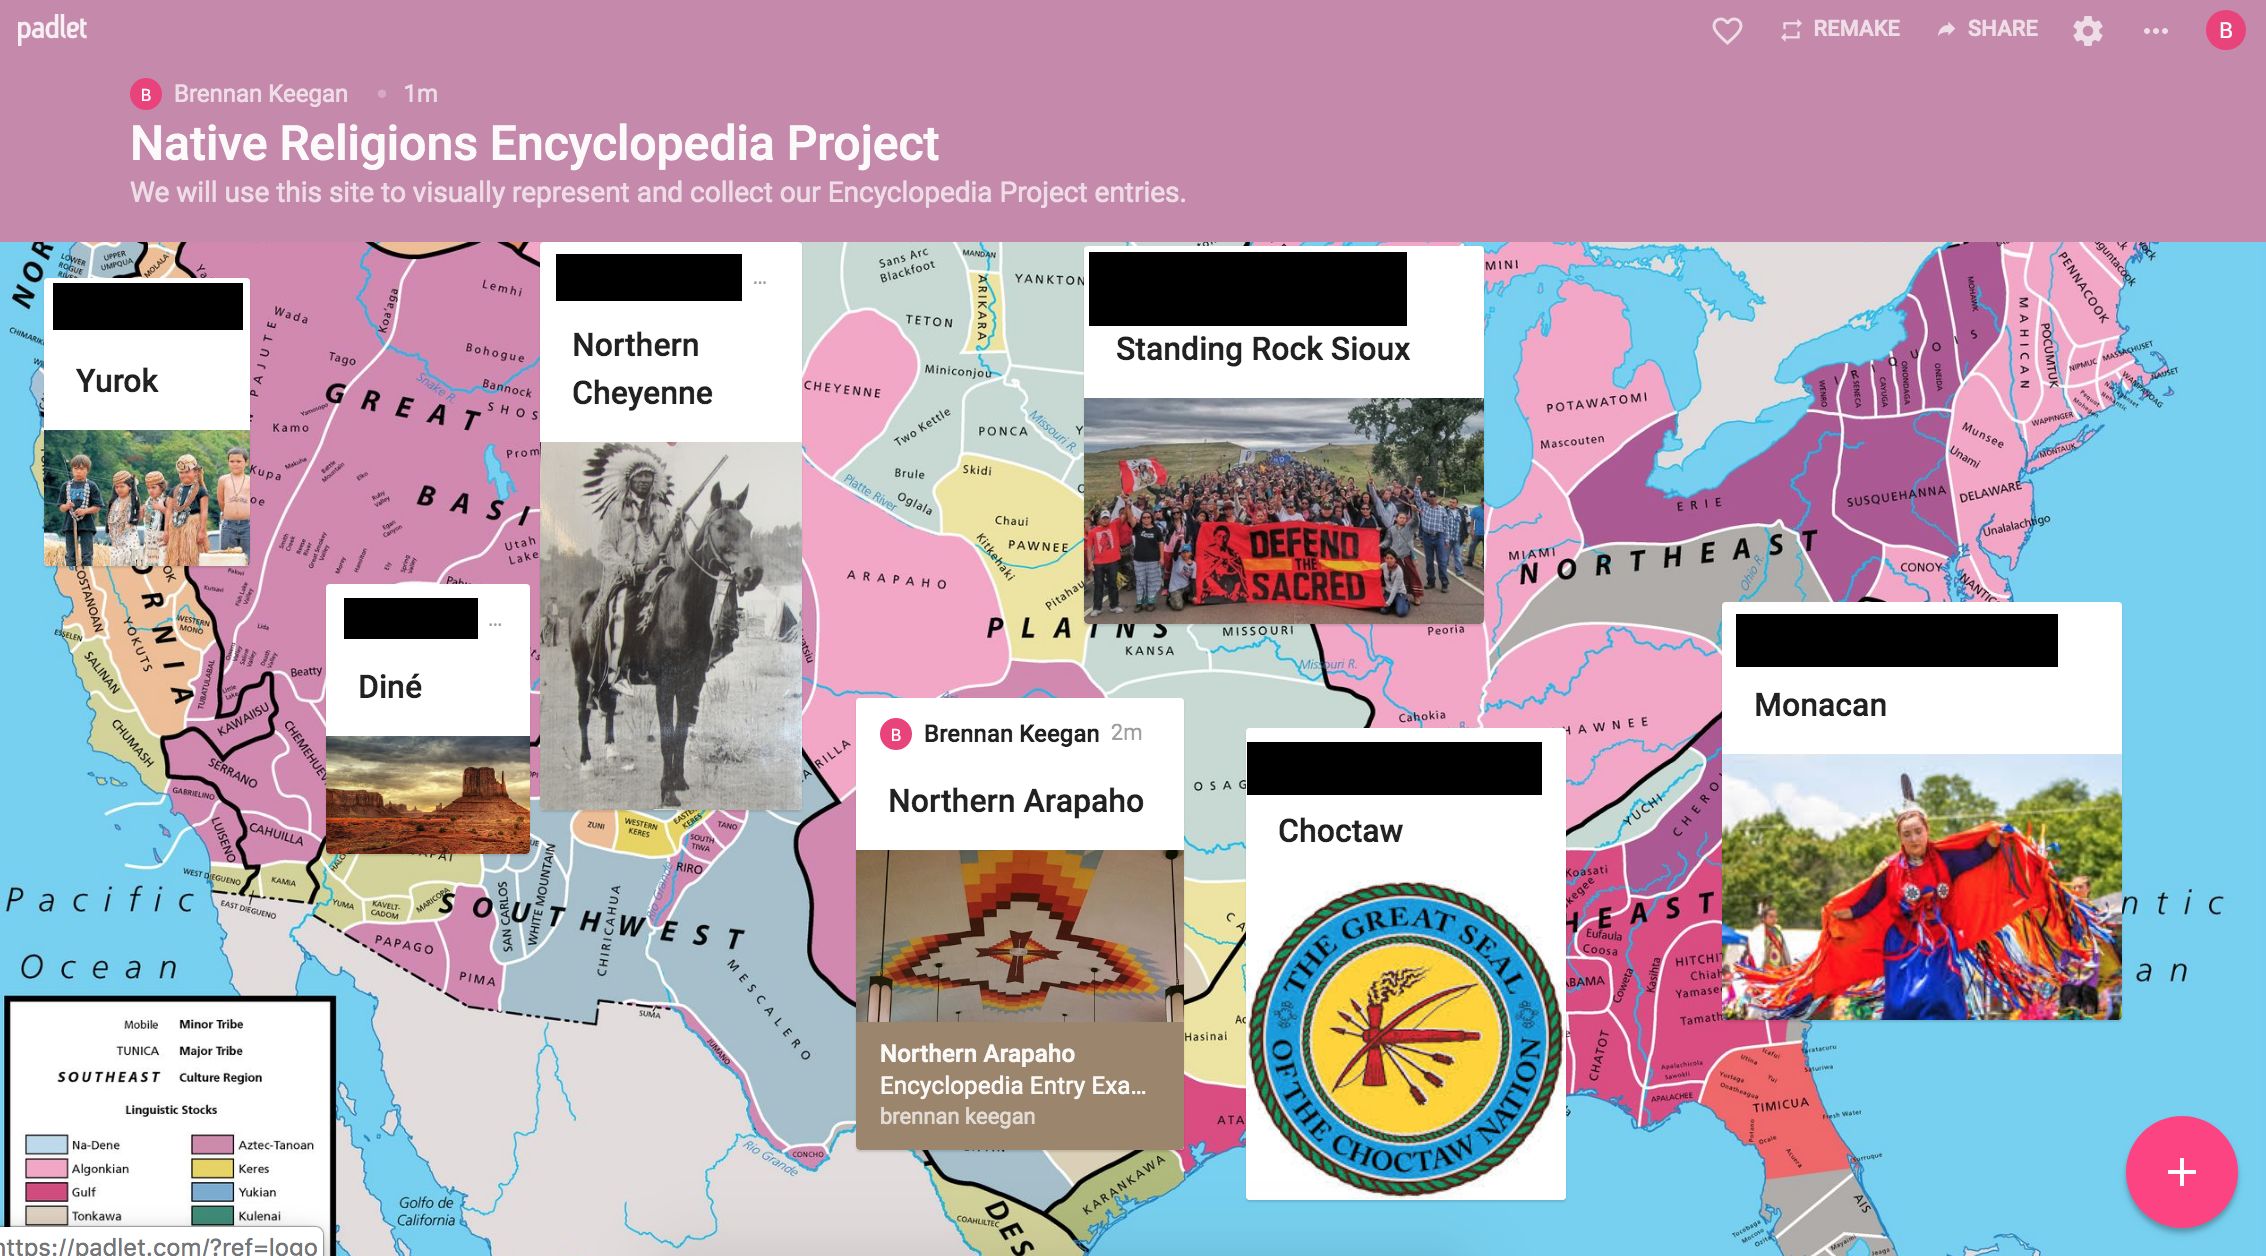 Clickable images connect all student work to a central Padlet homepage